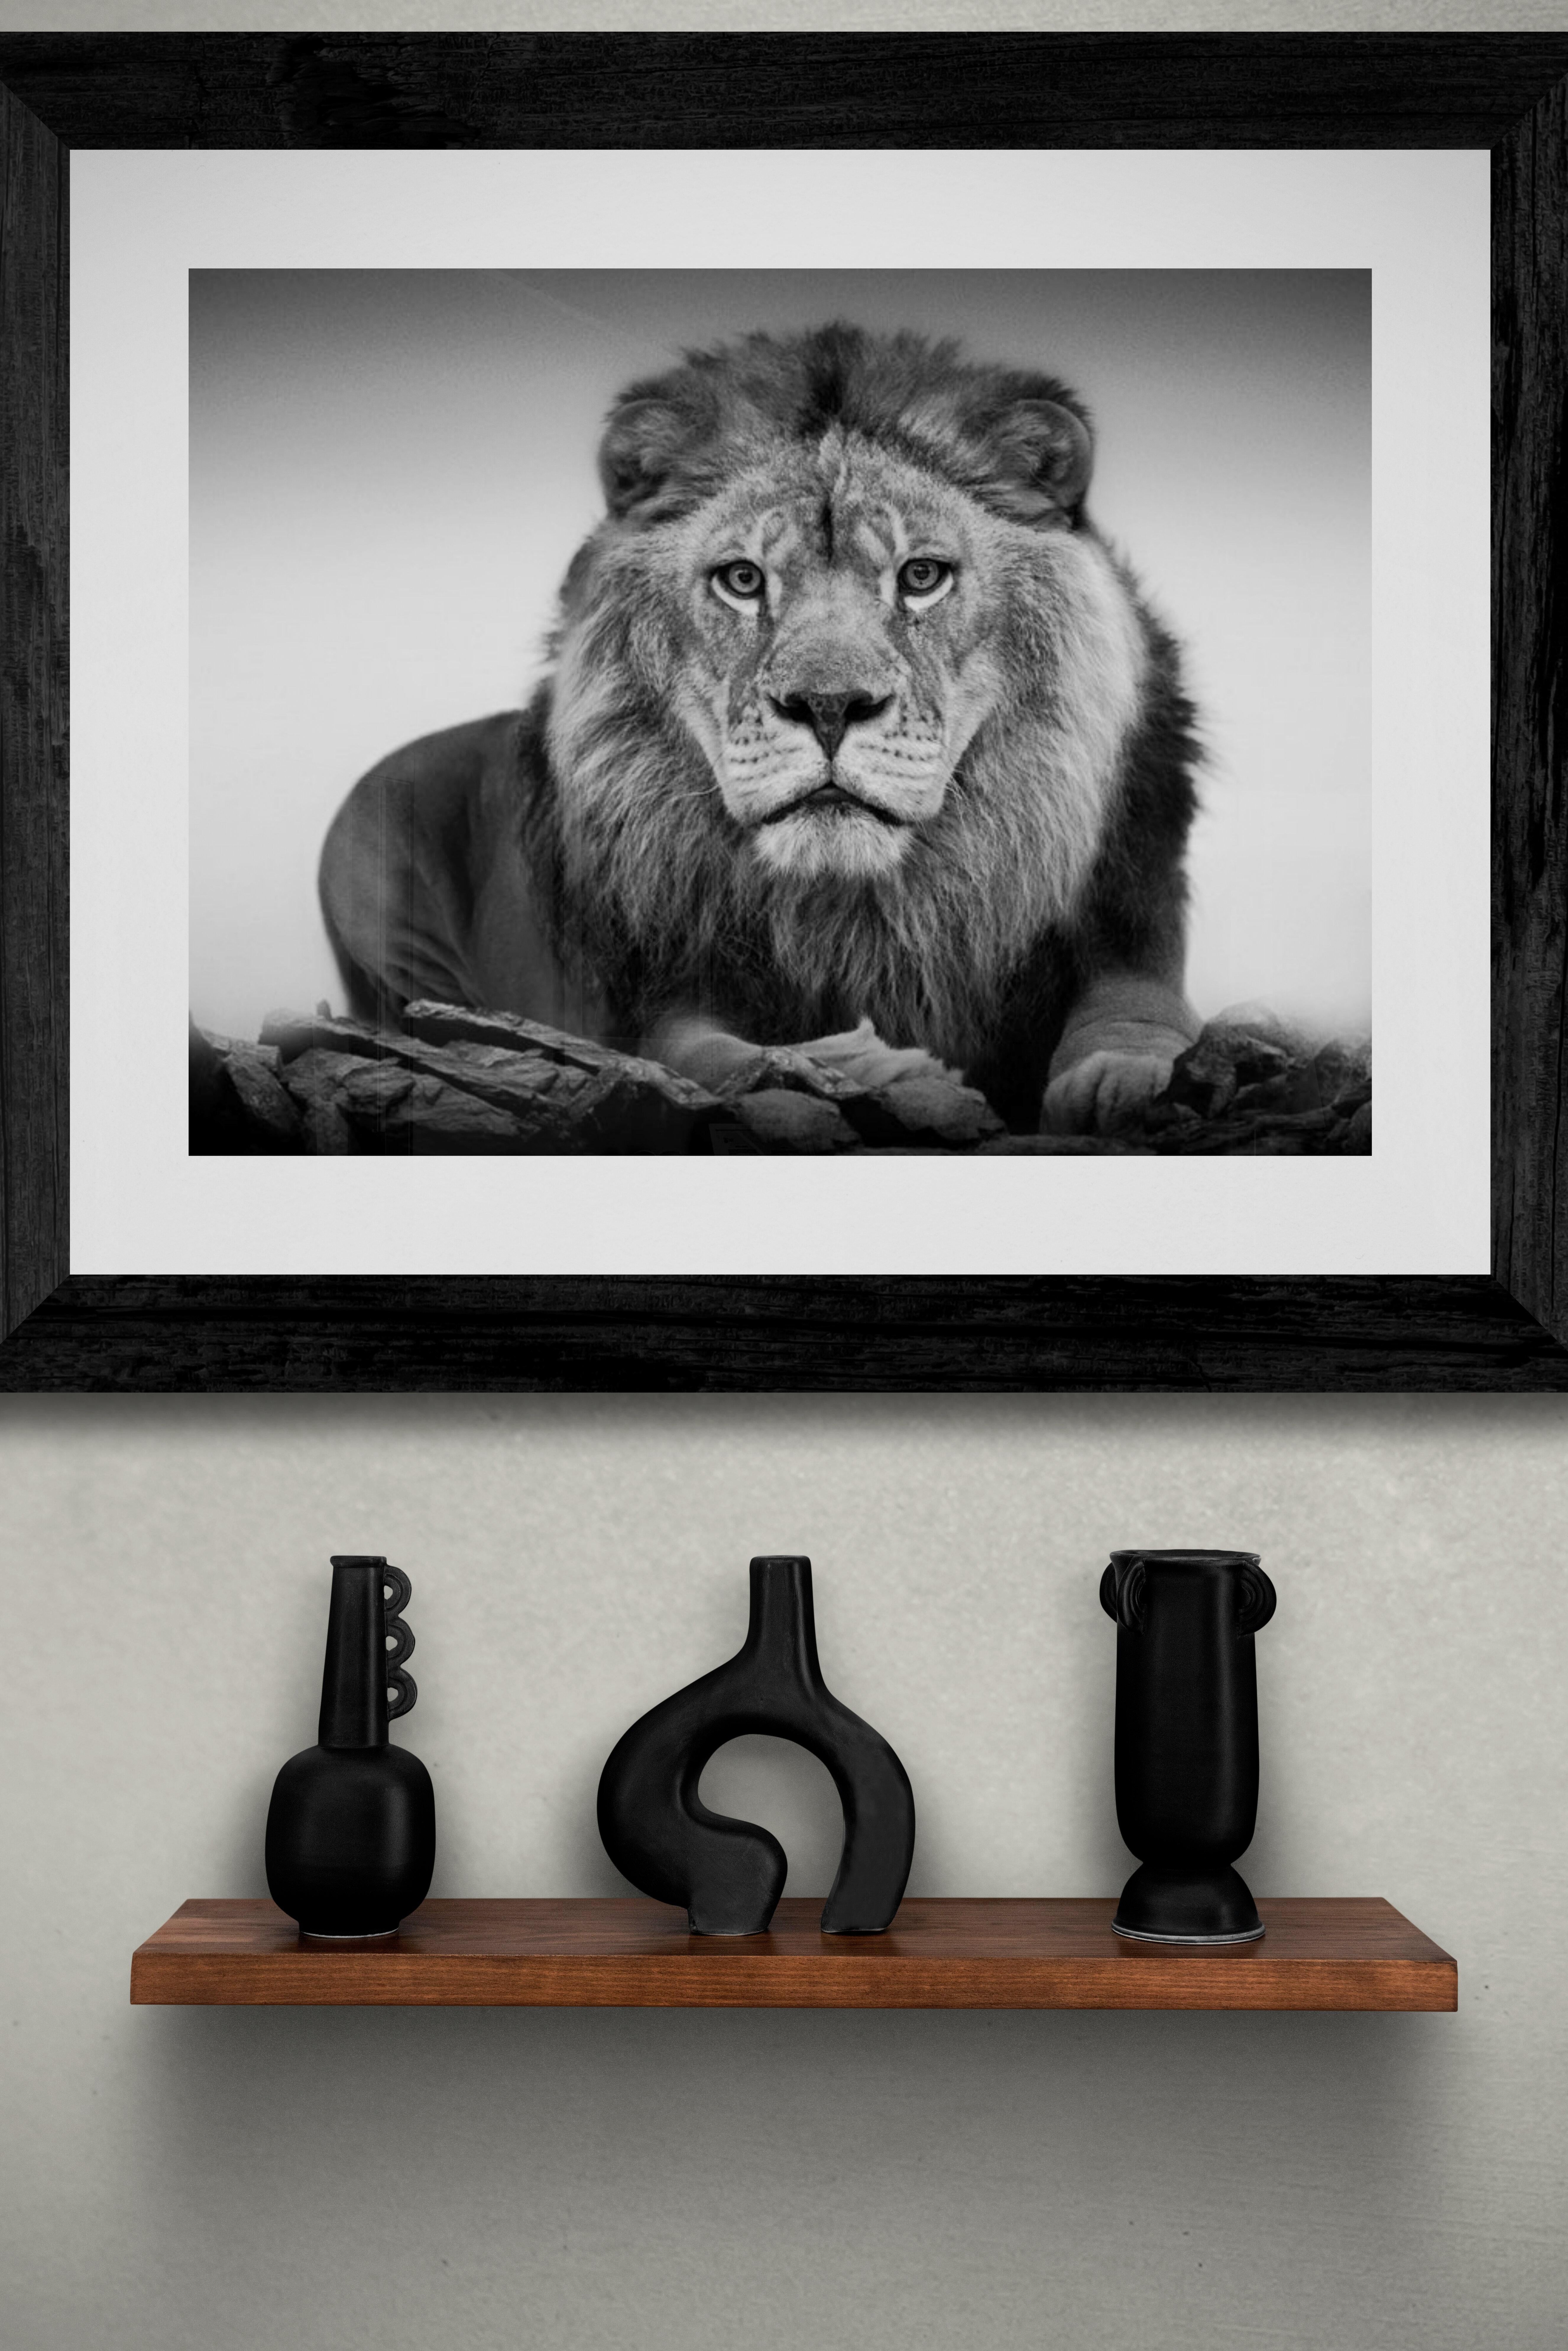 This is a contemporary photograph of an African Lion. 
36x48
Singed and numbered
Edition of 12
Archival Semi Gloss Paper.
Framing available. Inquire for rates. 

FREE SHIPPING

Shane Russeck has built a reputation for capturing America's landscapes,